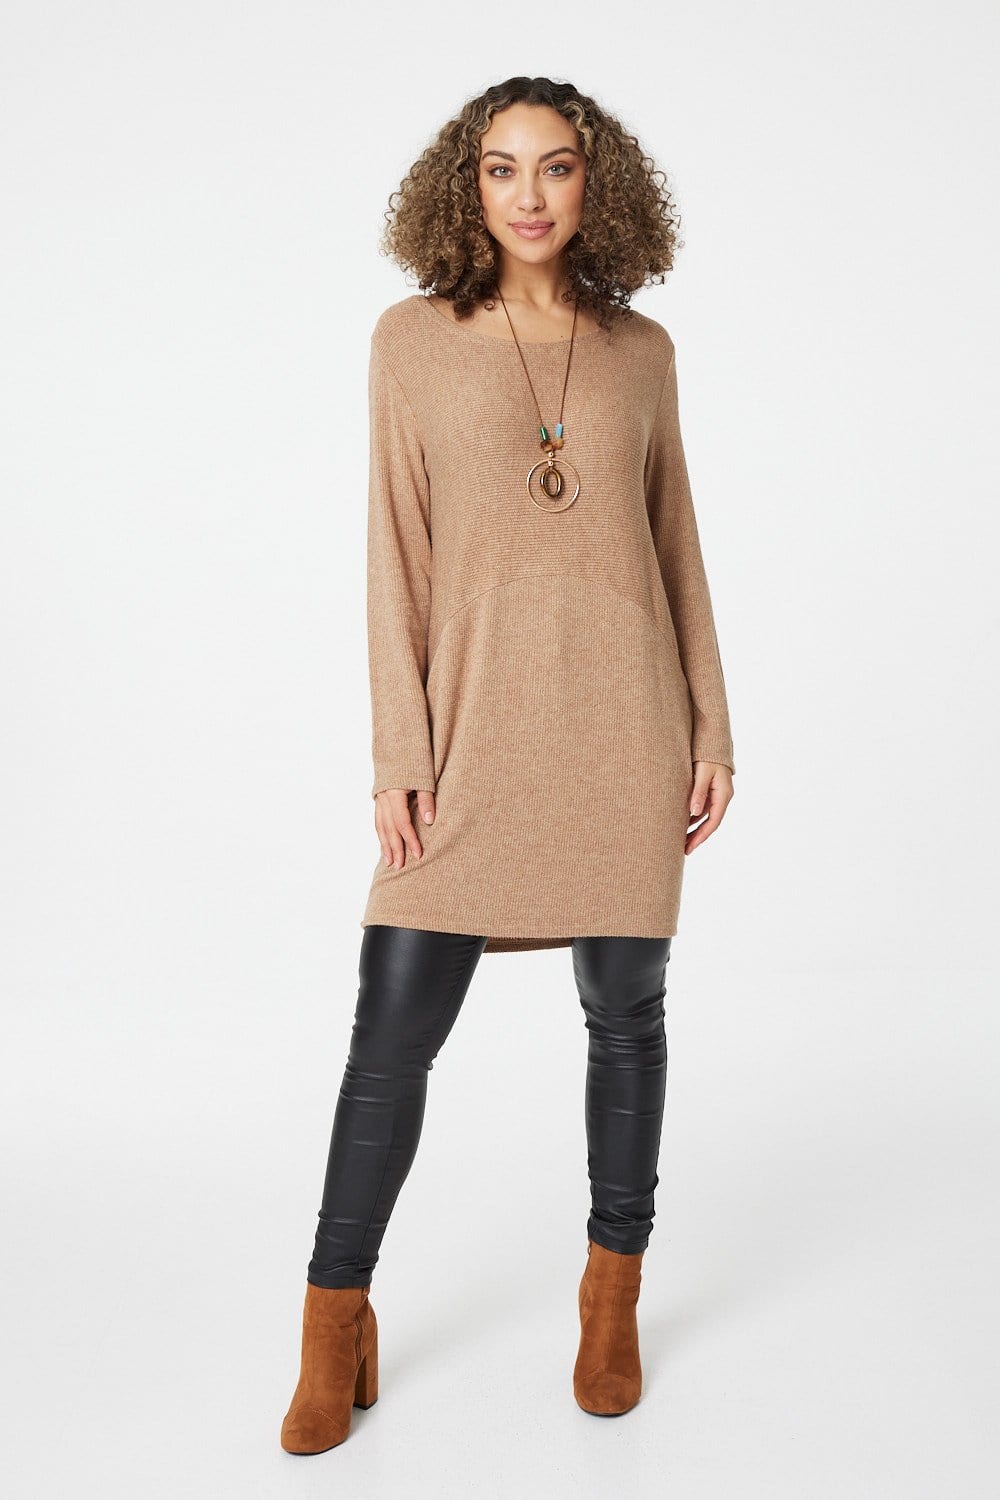 Beige | Longline Tunic Top with Necklace